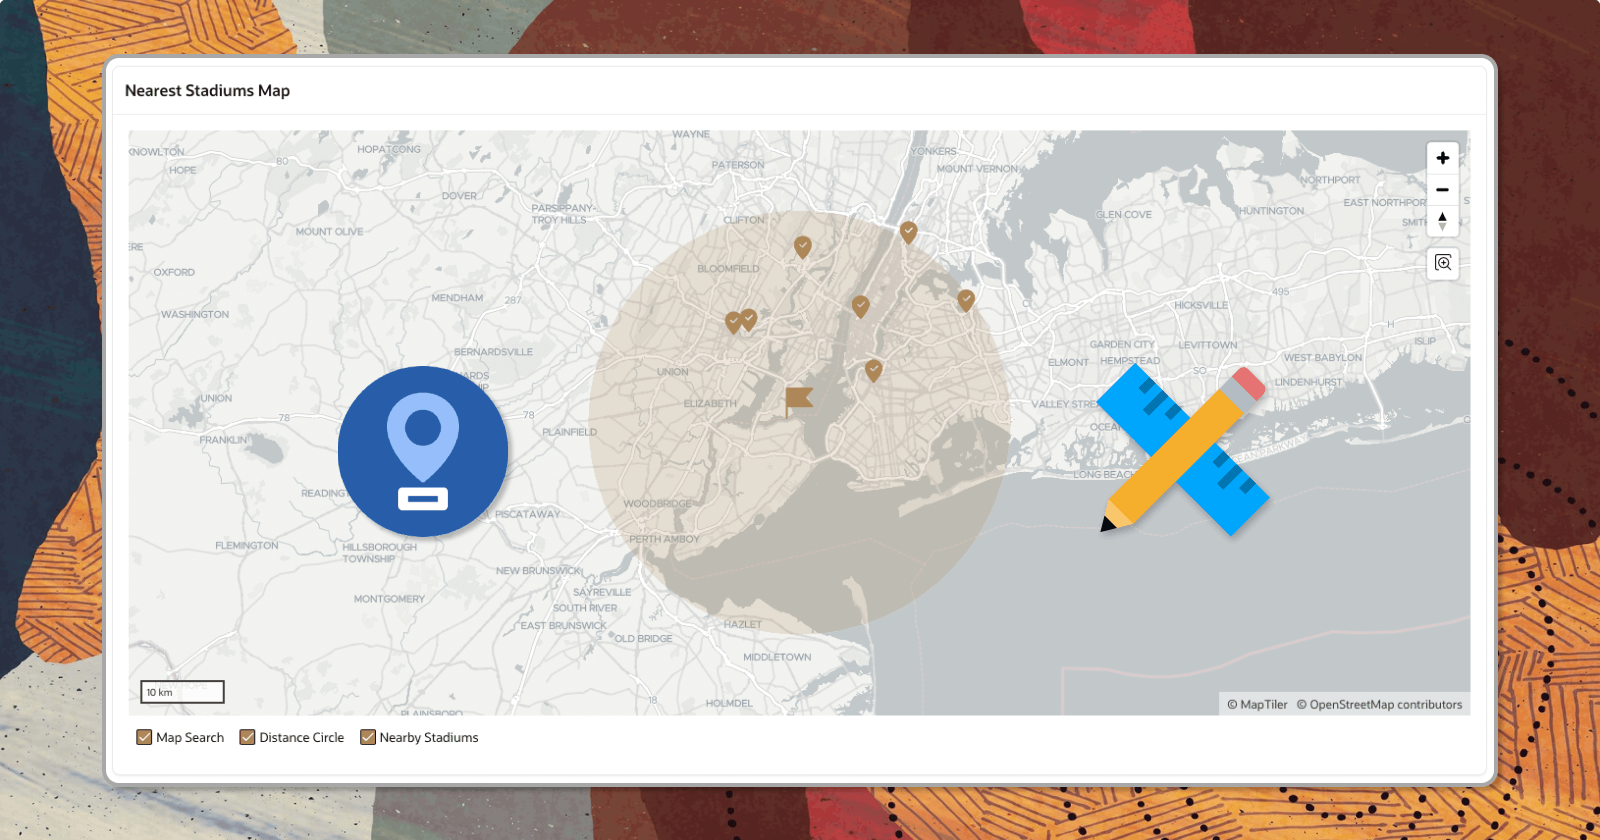 How to find nearest stadiums using Oracle APEX maps and geolocation